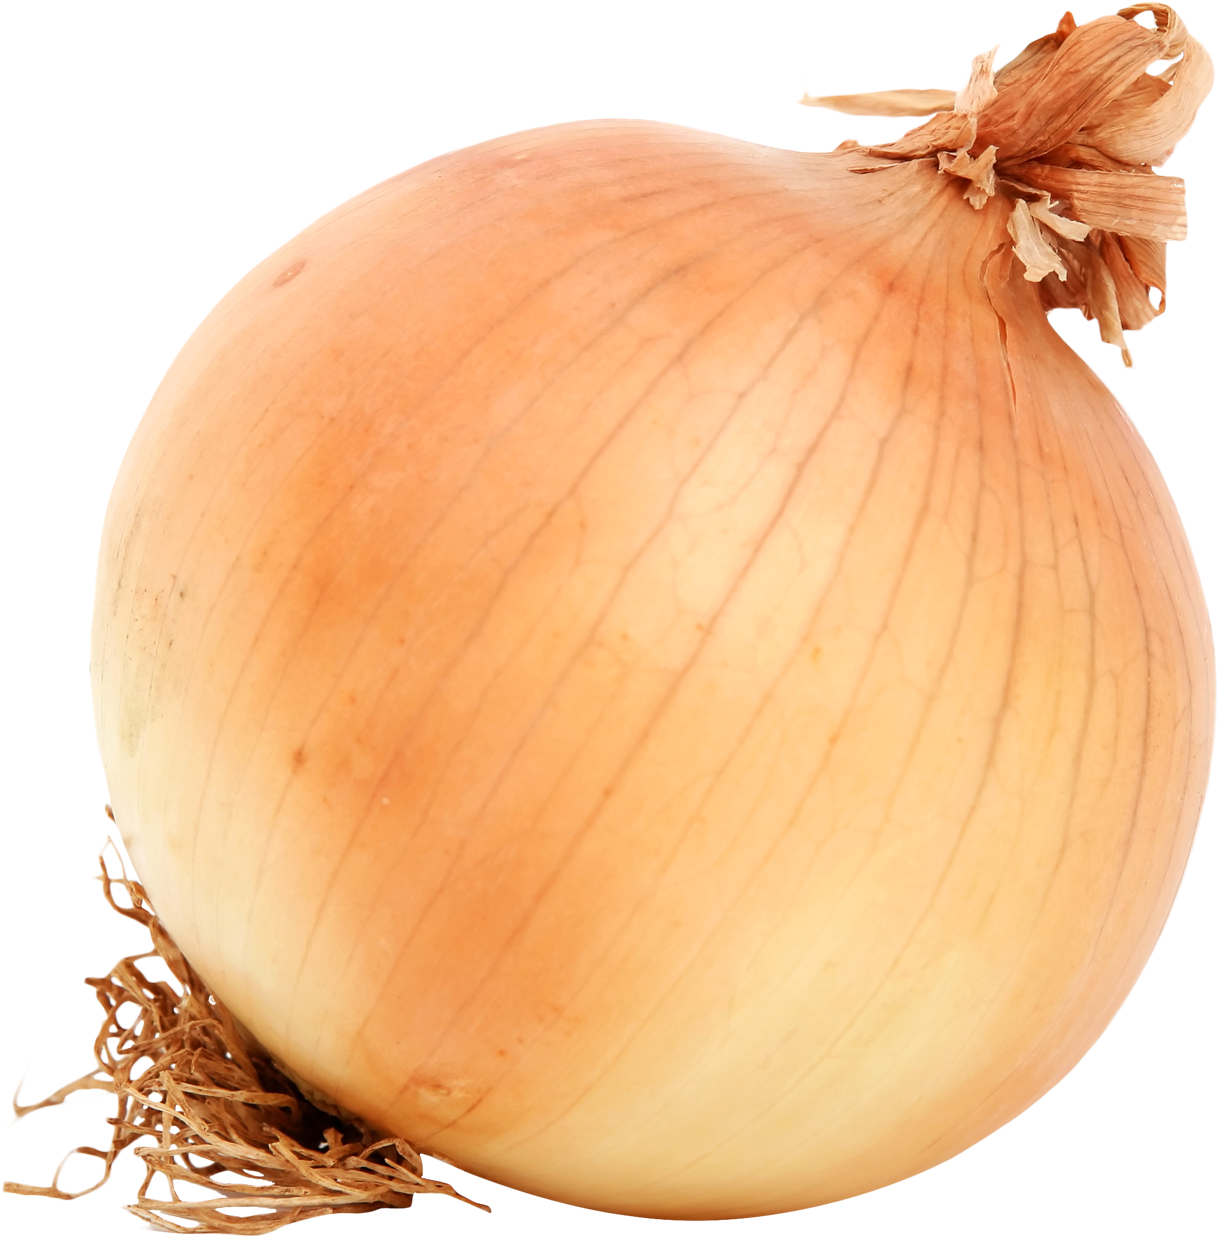 Onion Png Transparent Images - Baby At 17 Weeks (1265x1299)